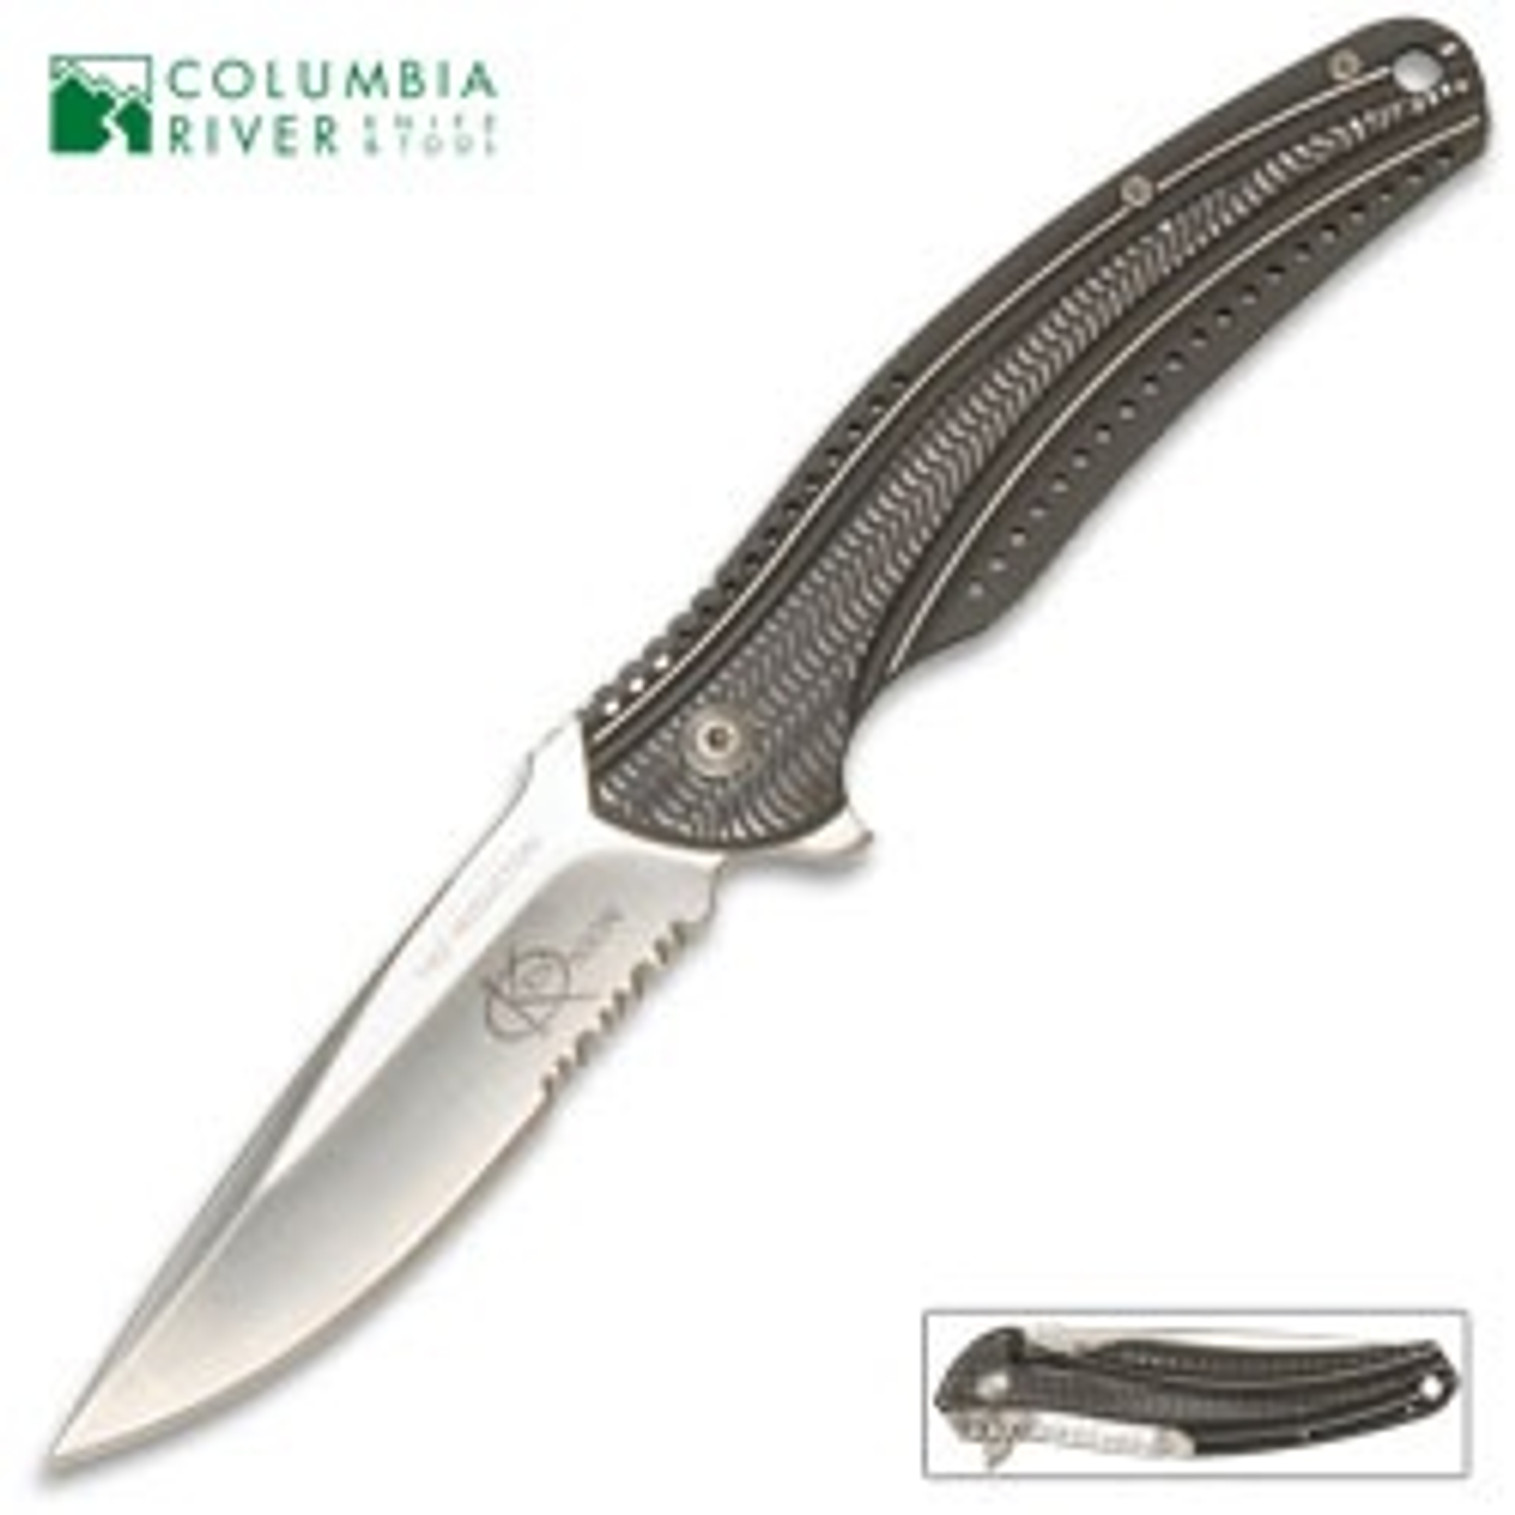 Columbia River Ripple Charcoal Scales Serrated Knife